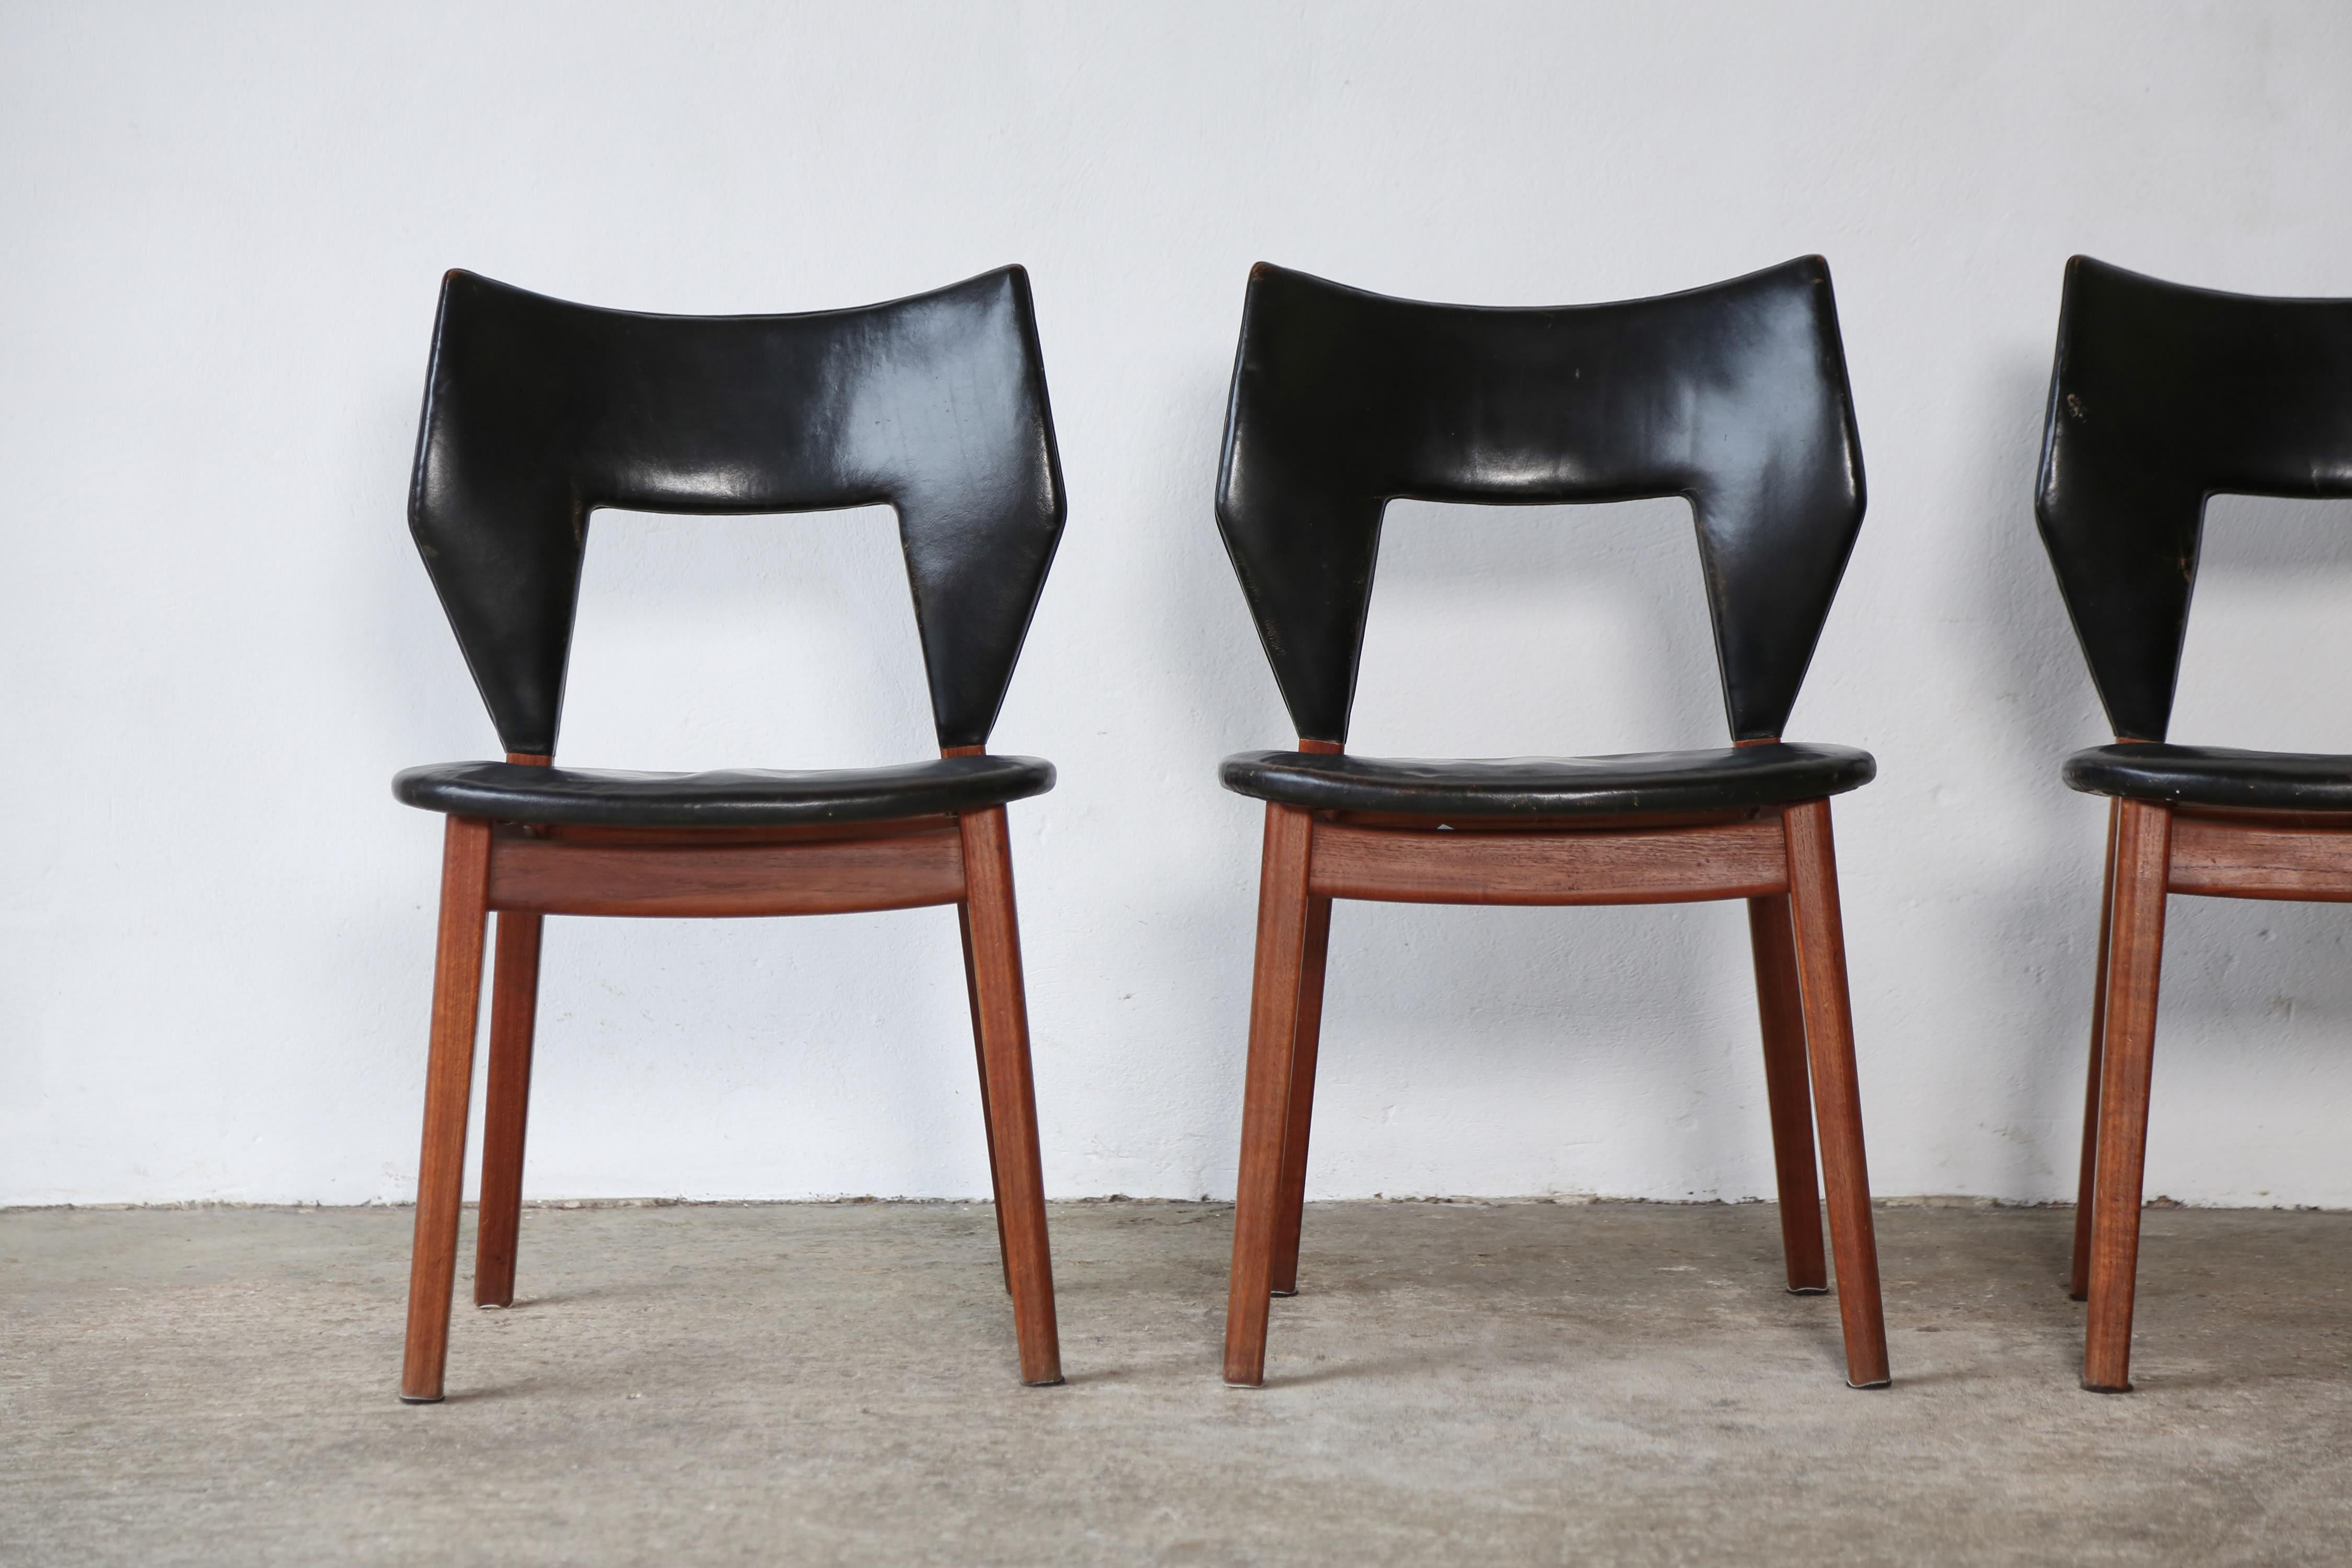 Danish Edvard and Tove Kindt-Larsen Dining Chairs, Thorald Madsens, Denmark, 1950s For Sale